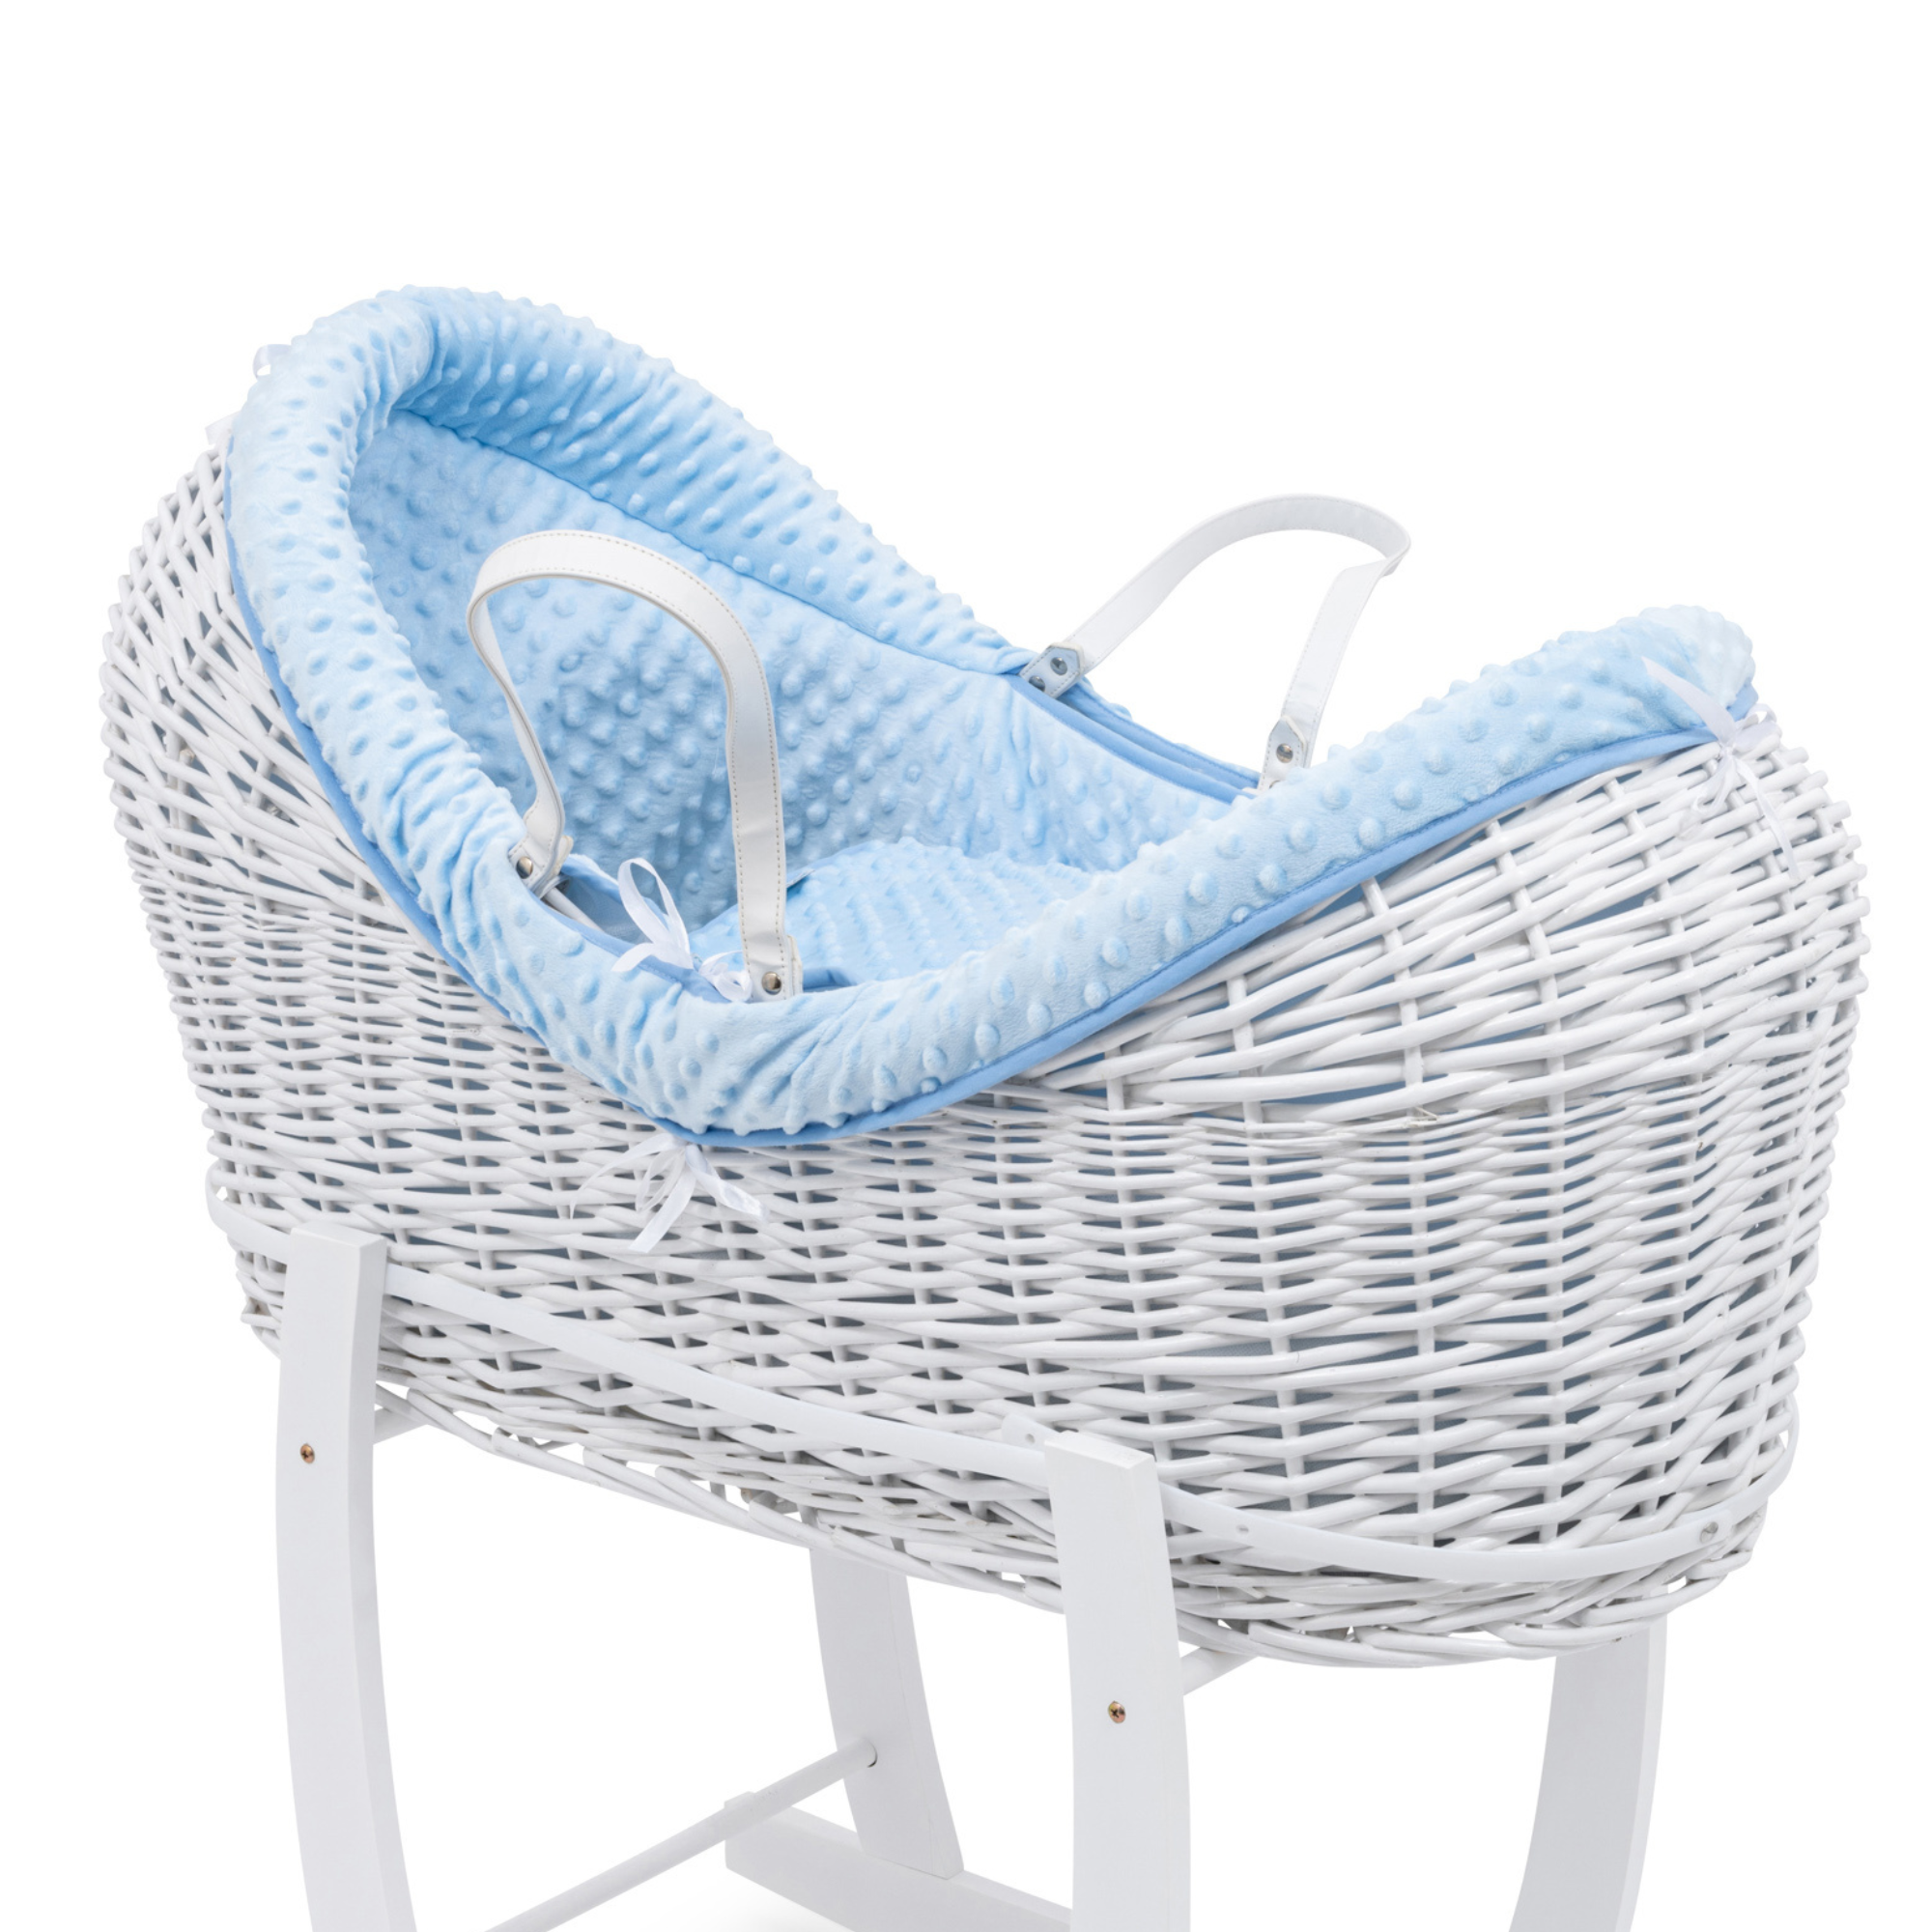 Pod Blue Dimple Moses Basket Bedding Set - For Your Little One